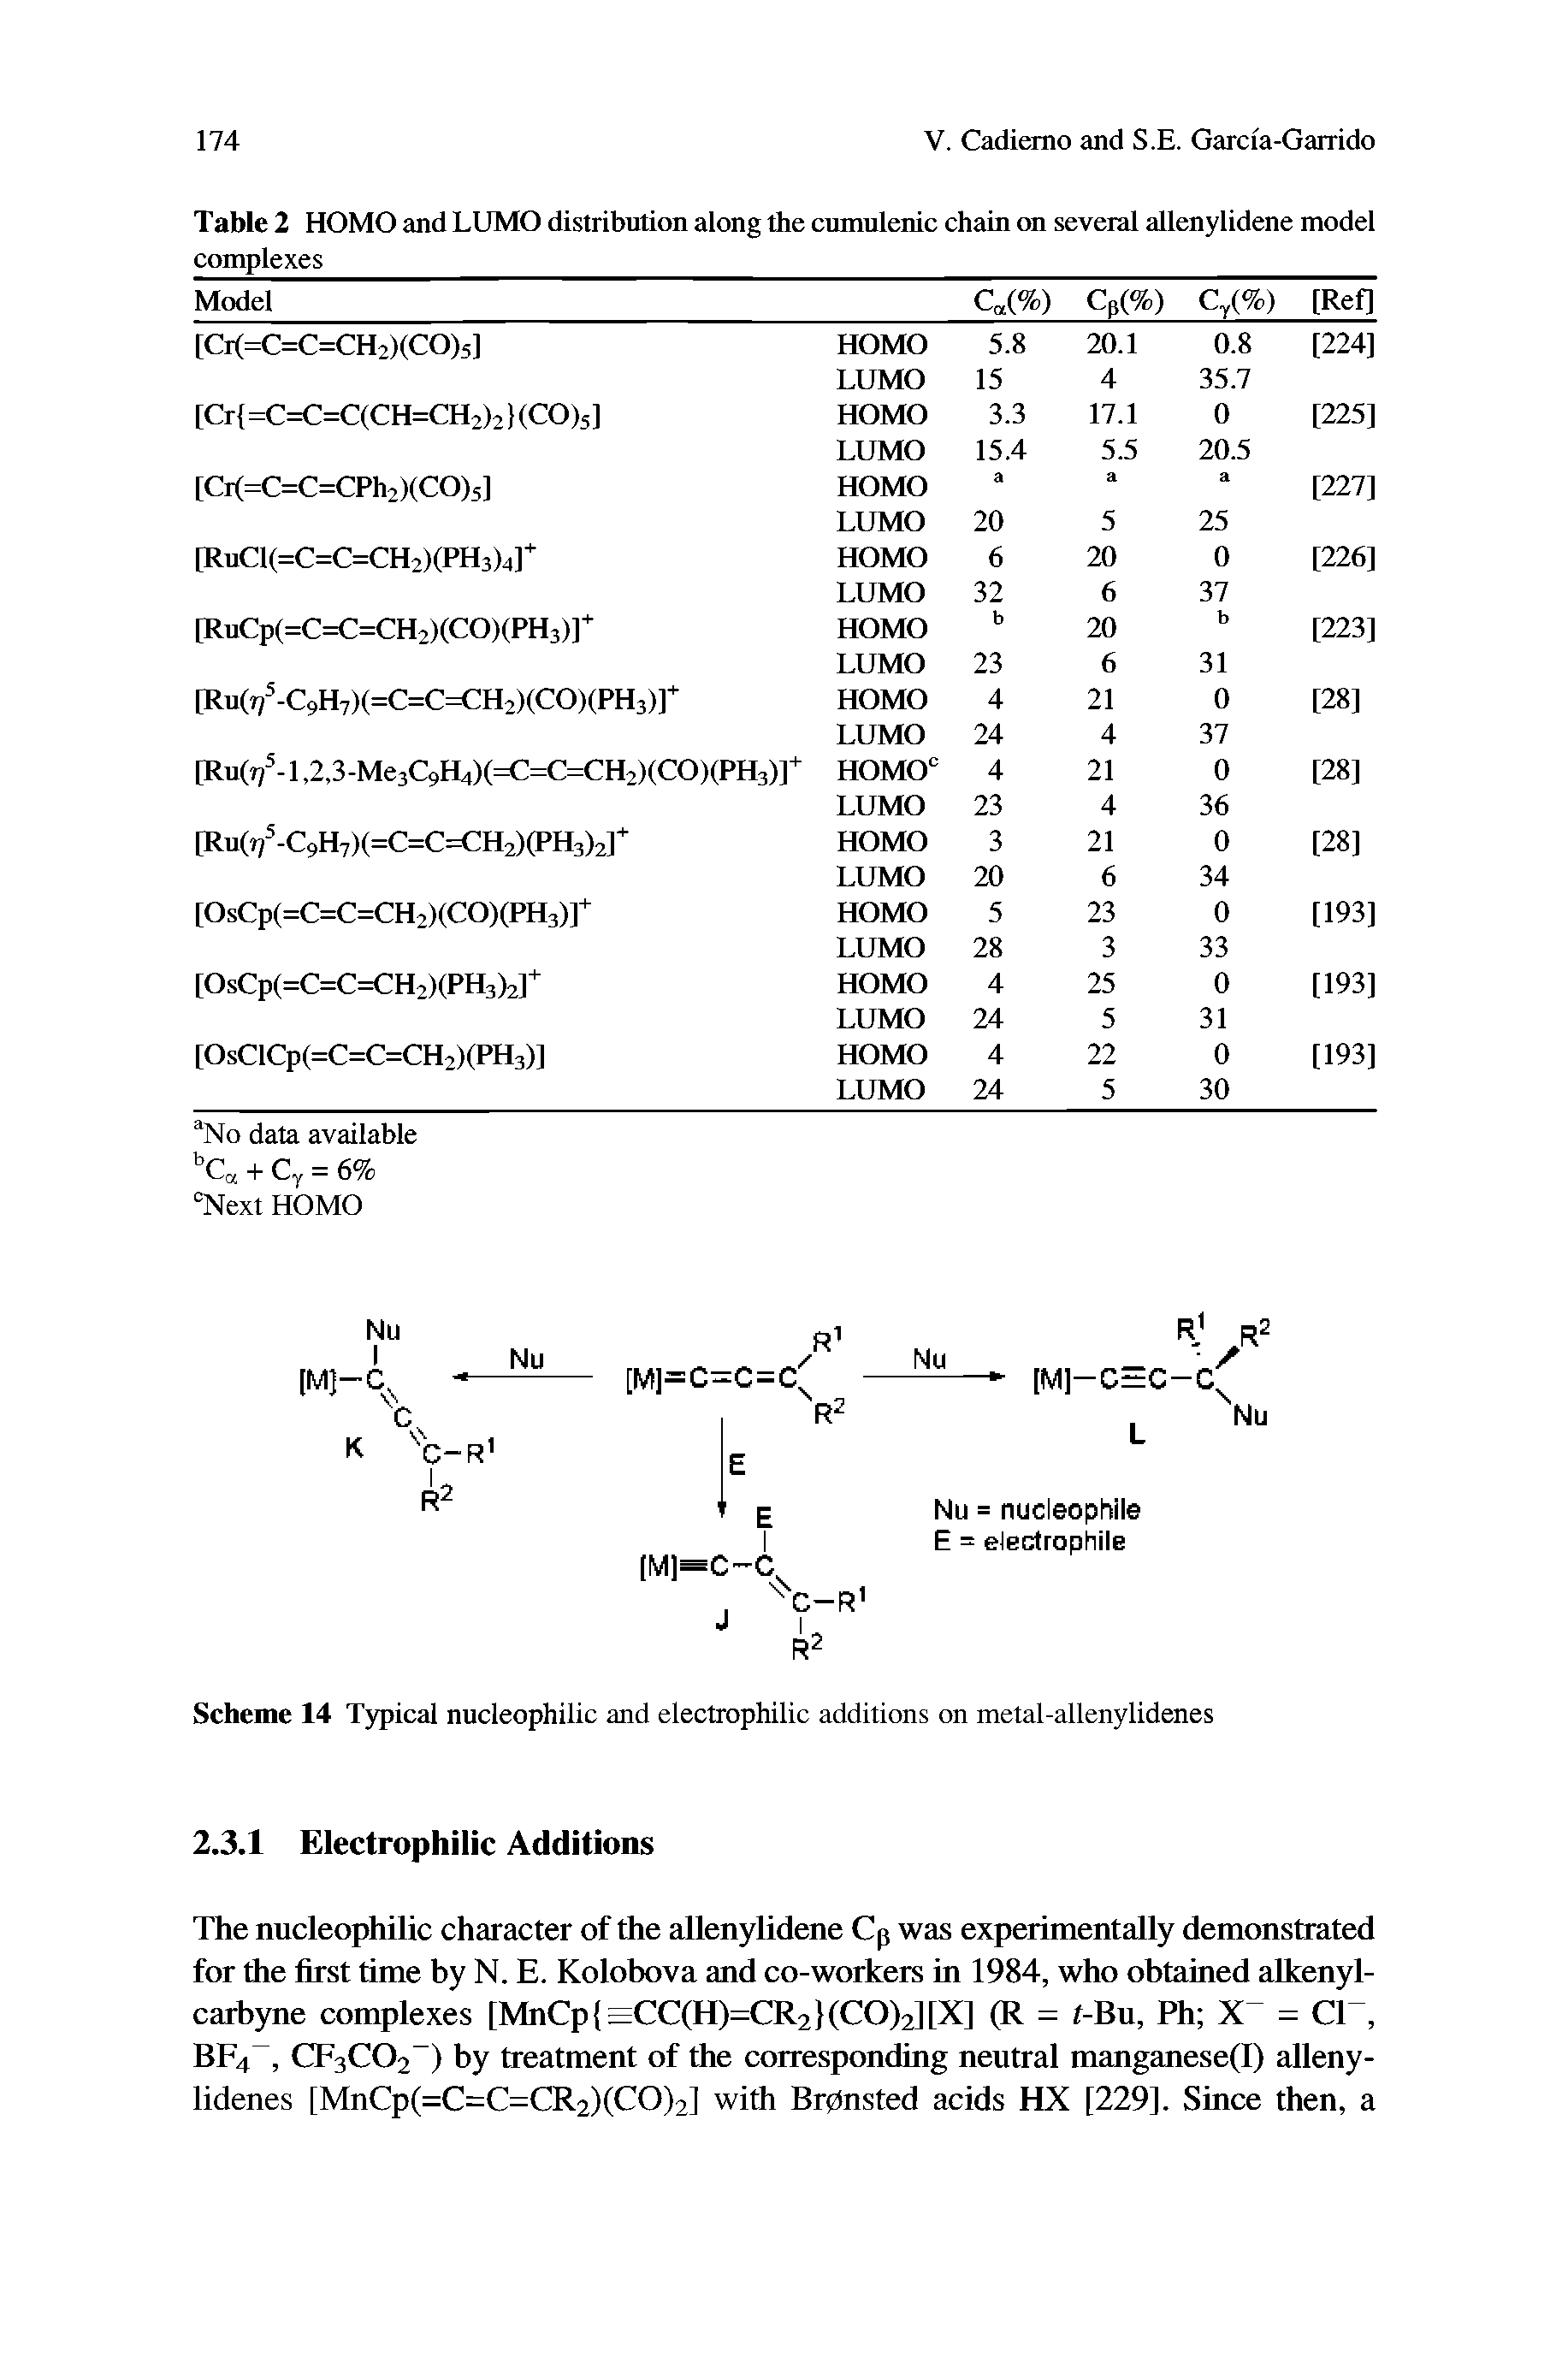 Scheme 14 Typical nucleophilic and electrophilic additions on metal-allenylidenes...